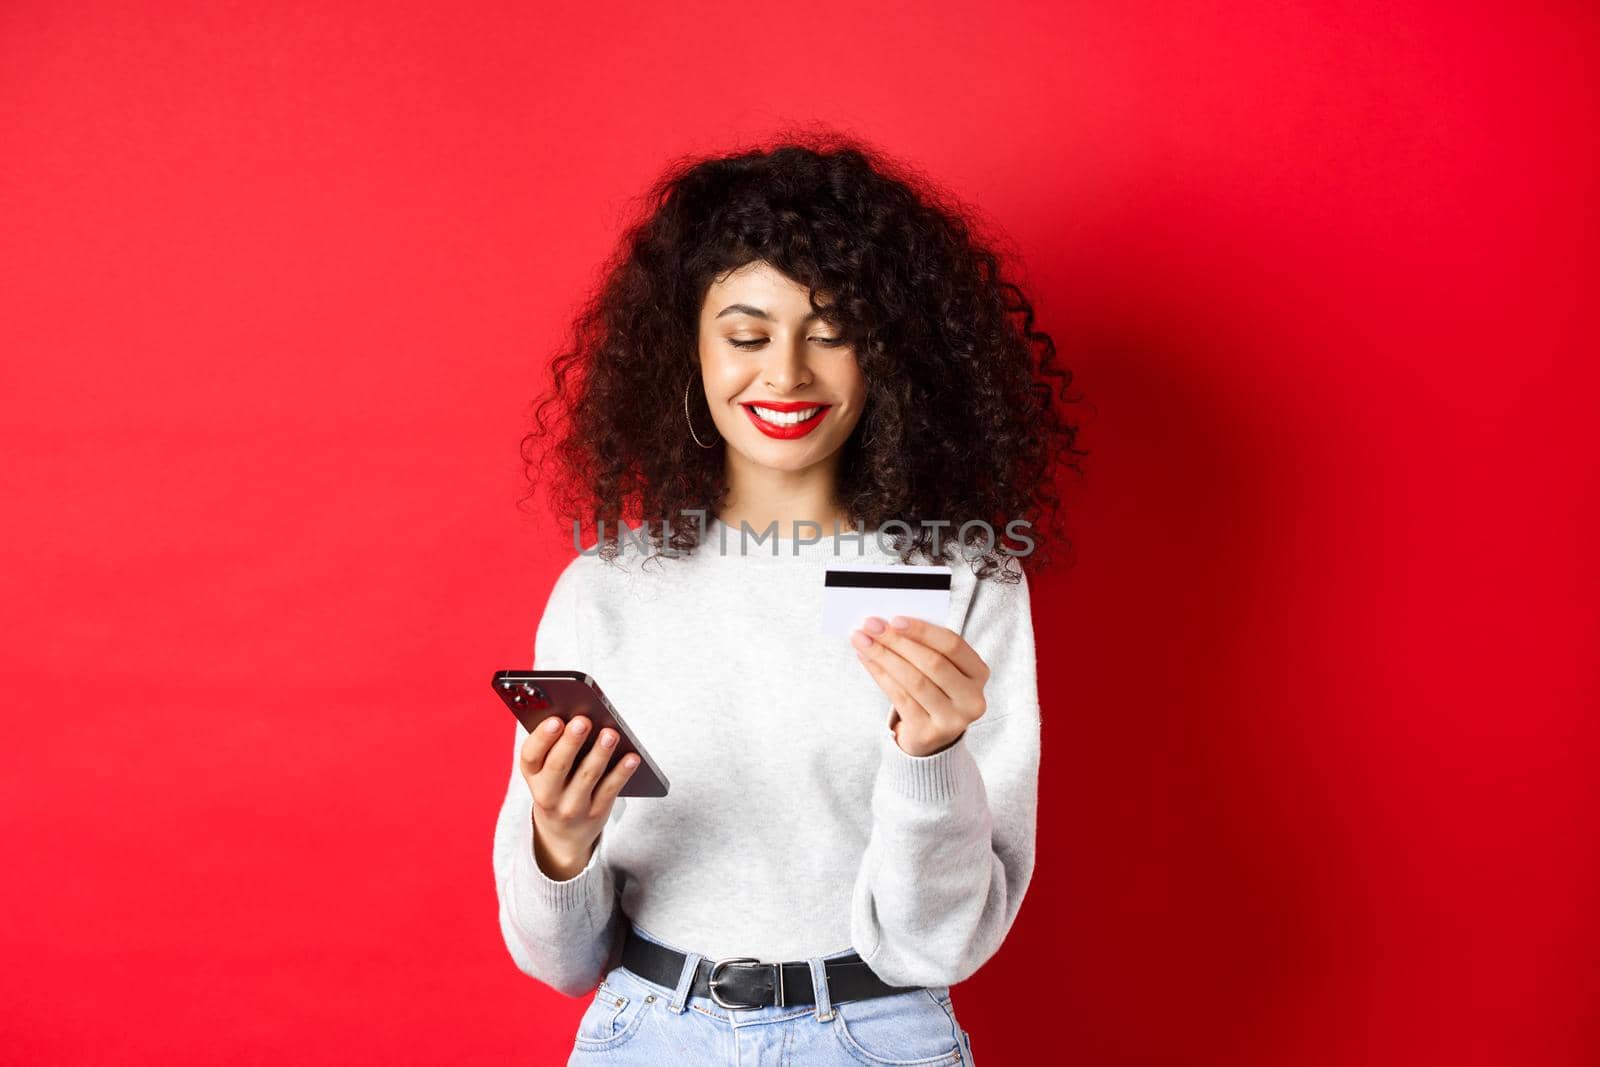 E-commerce and online shopping concept. Young modern woman paying with credit card, making purchase with smartphone, standing on red background.